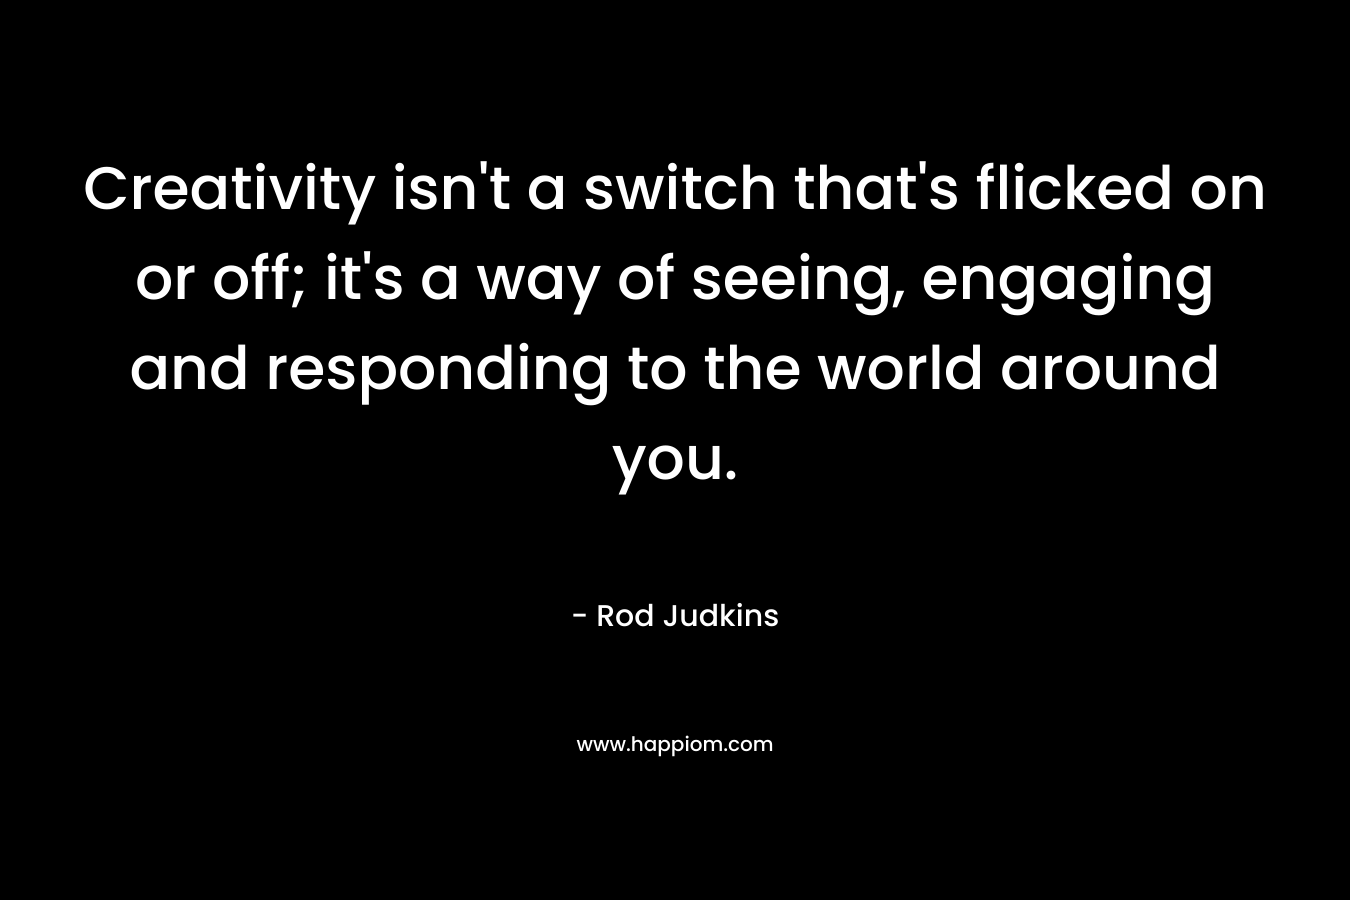 Creativity isn't a switch that's flicked on or off; it's a way of seeing, engaging and responding to the world around you.